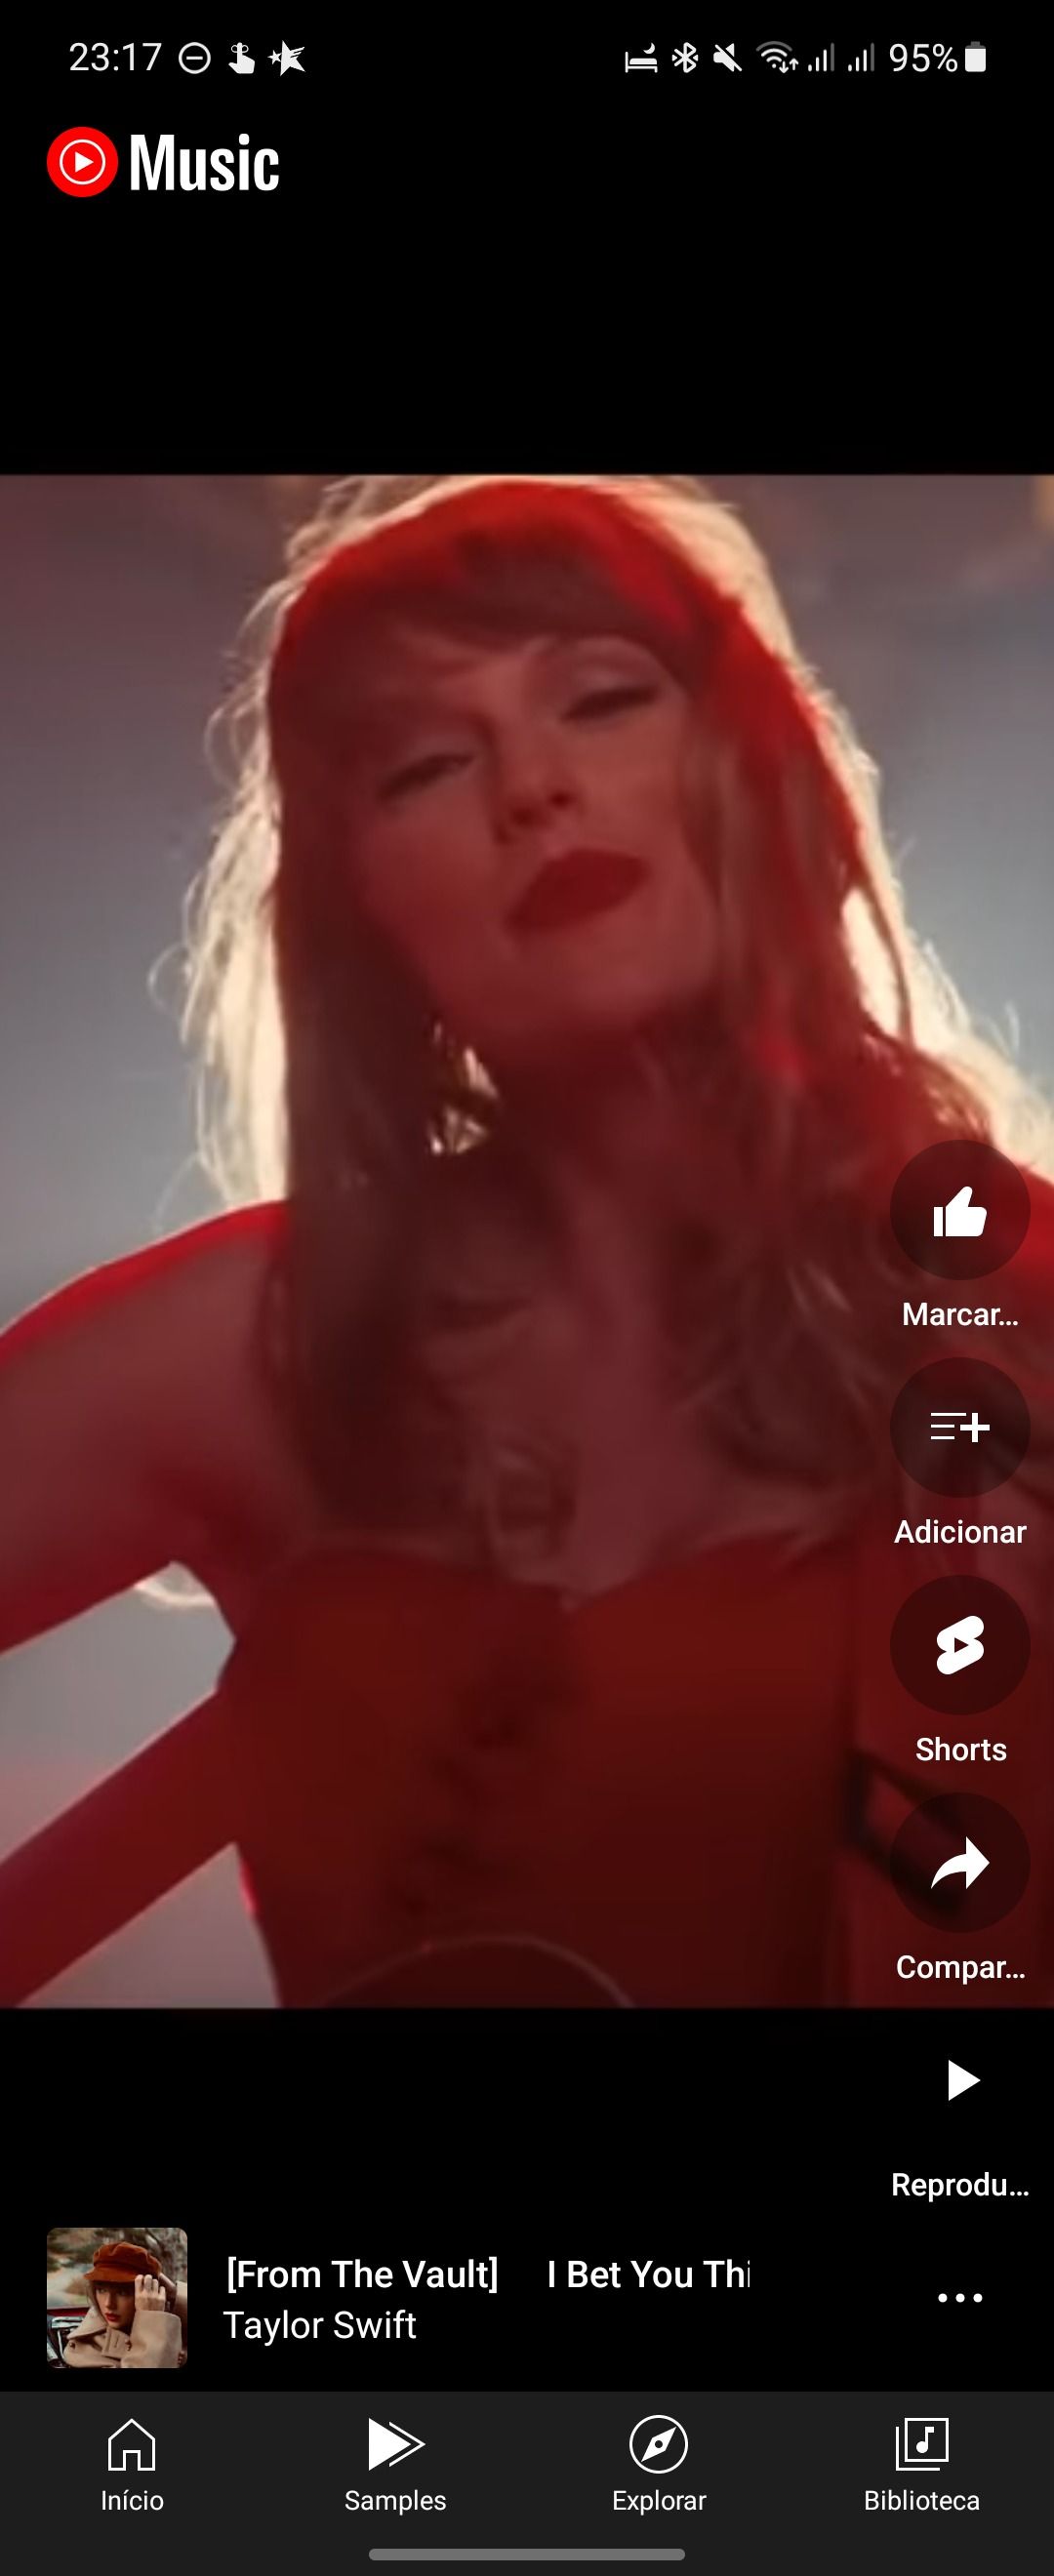 YouTube Music's new samples tab showing a music video of Taylor Swift